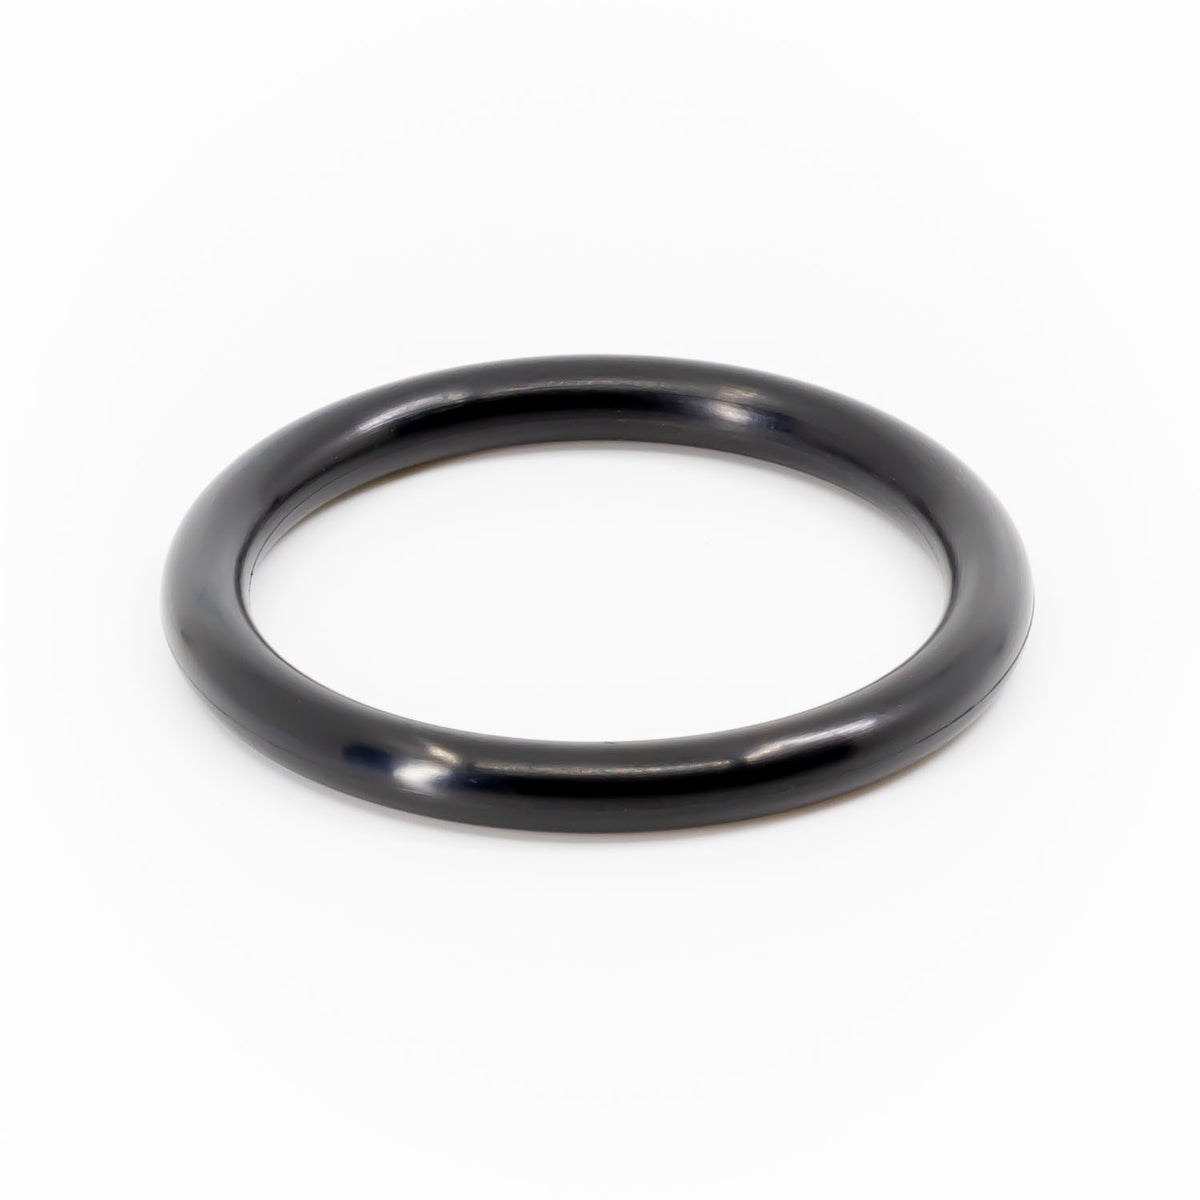 Oring - Black - for Mouthpiece or Core